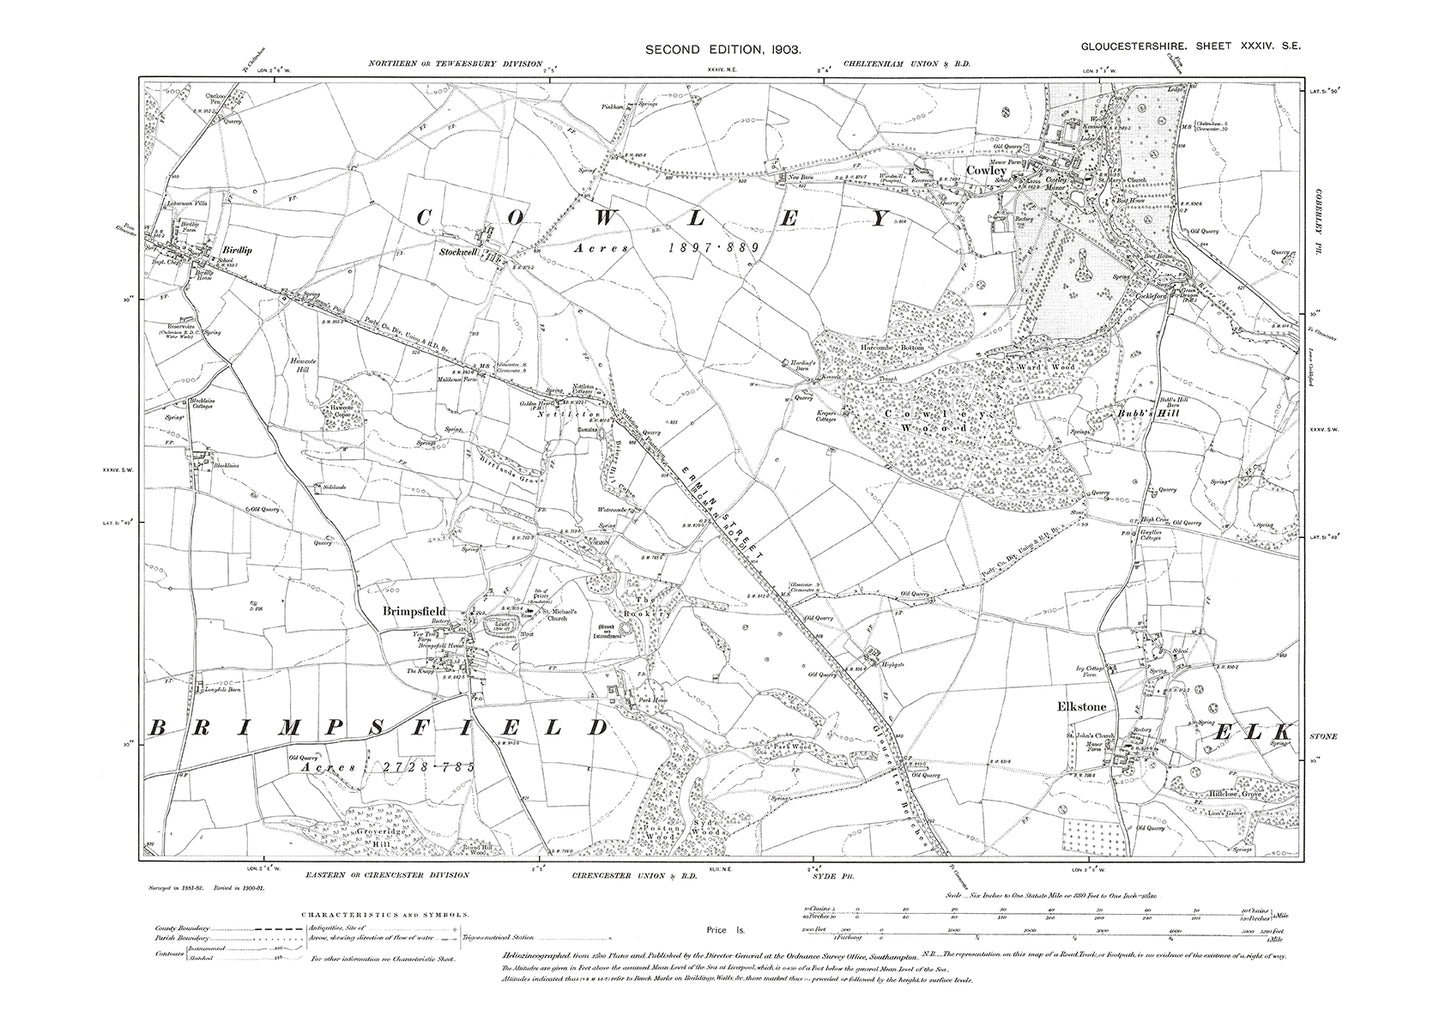 Old OS map dated 1903, showing Brimpsfield, Cowley, Elkstone in Gloucestershire - 34SE